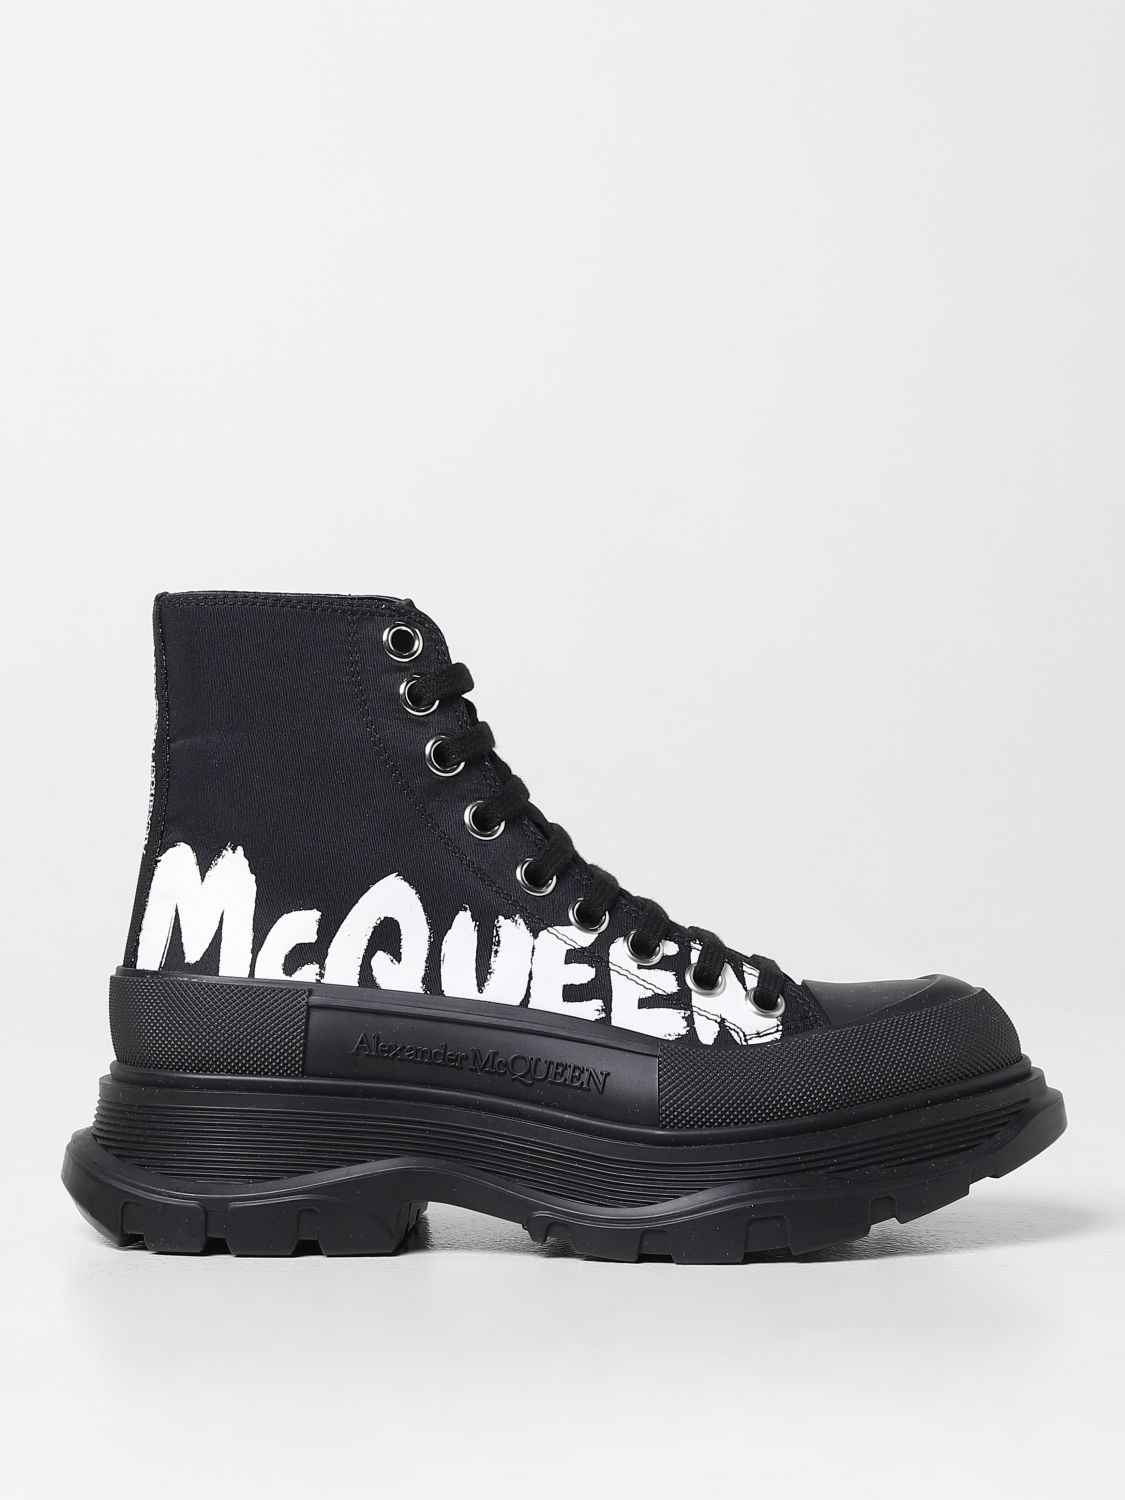 Alexander Mcqueen Flat Ankle Boots  Woman In Black